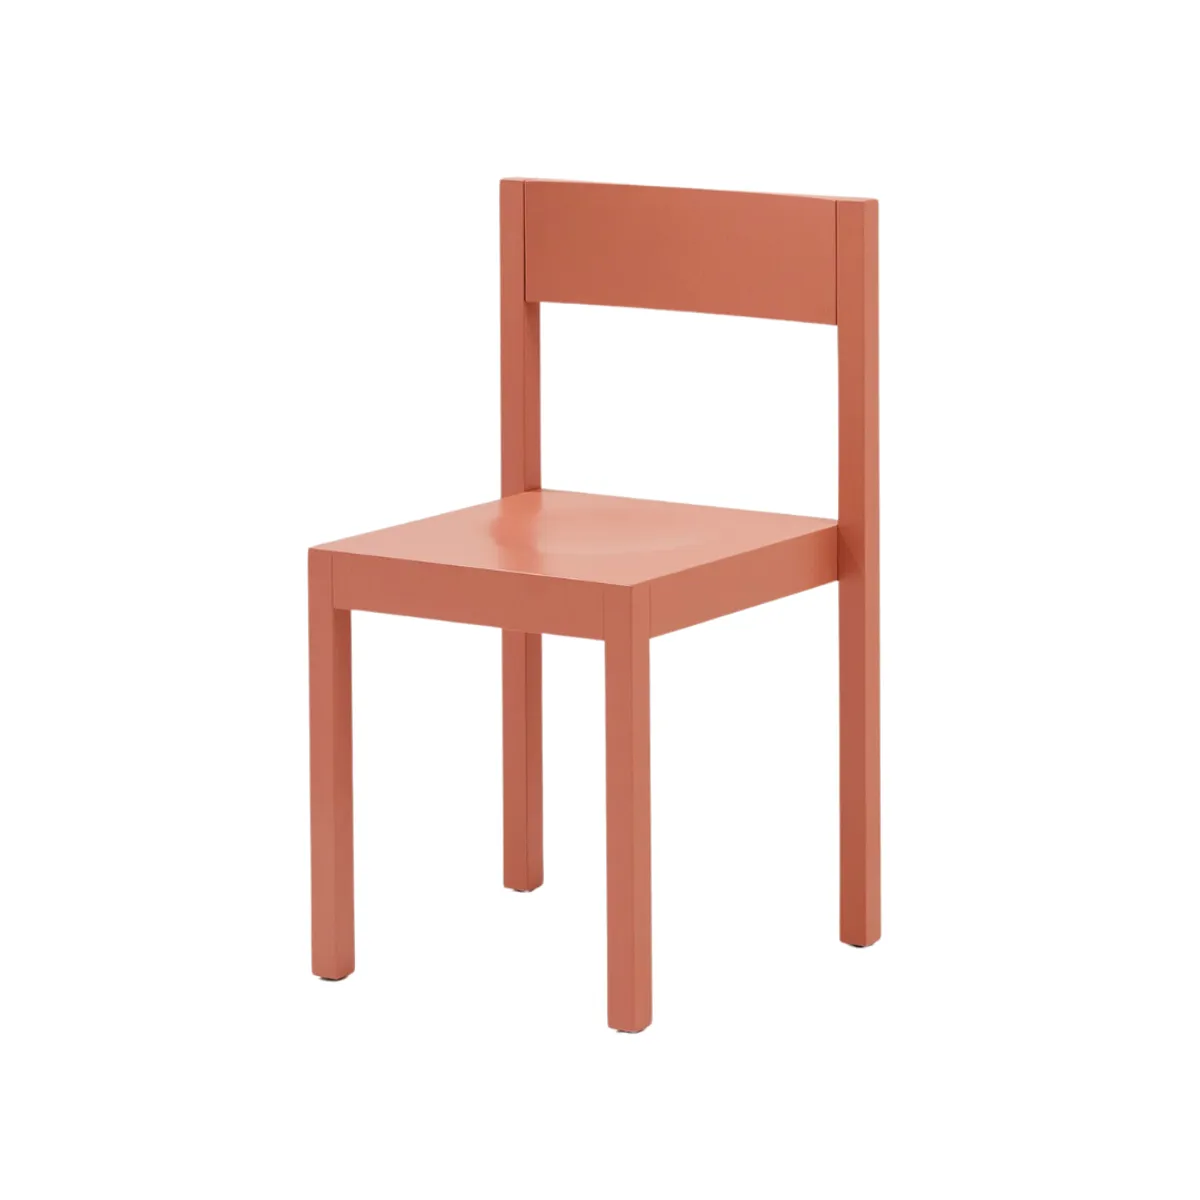 Archetype side chair 1